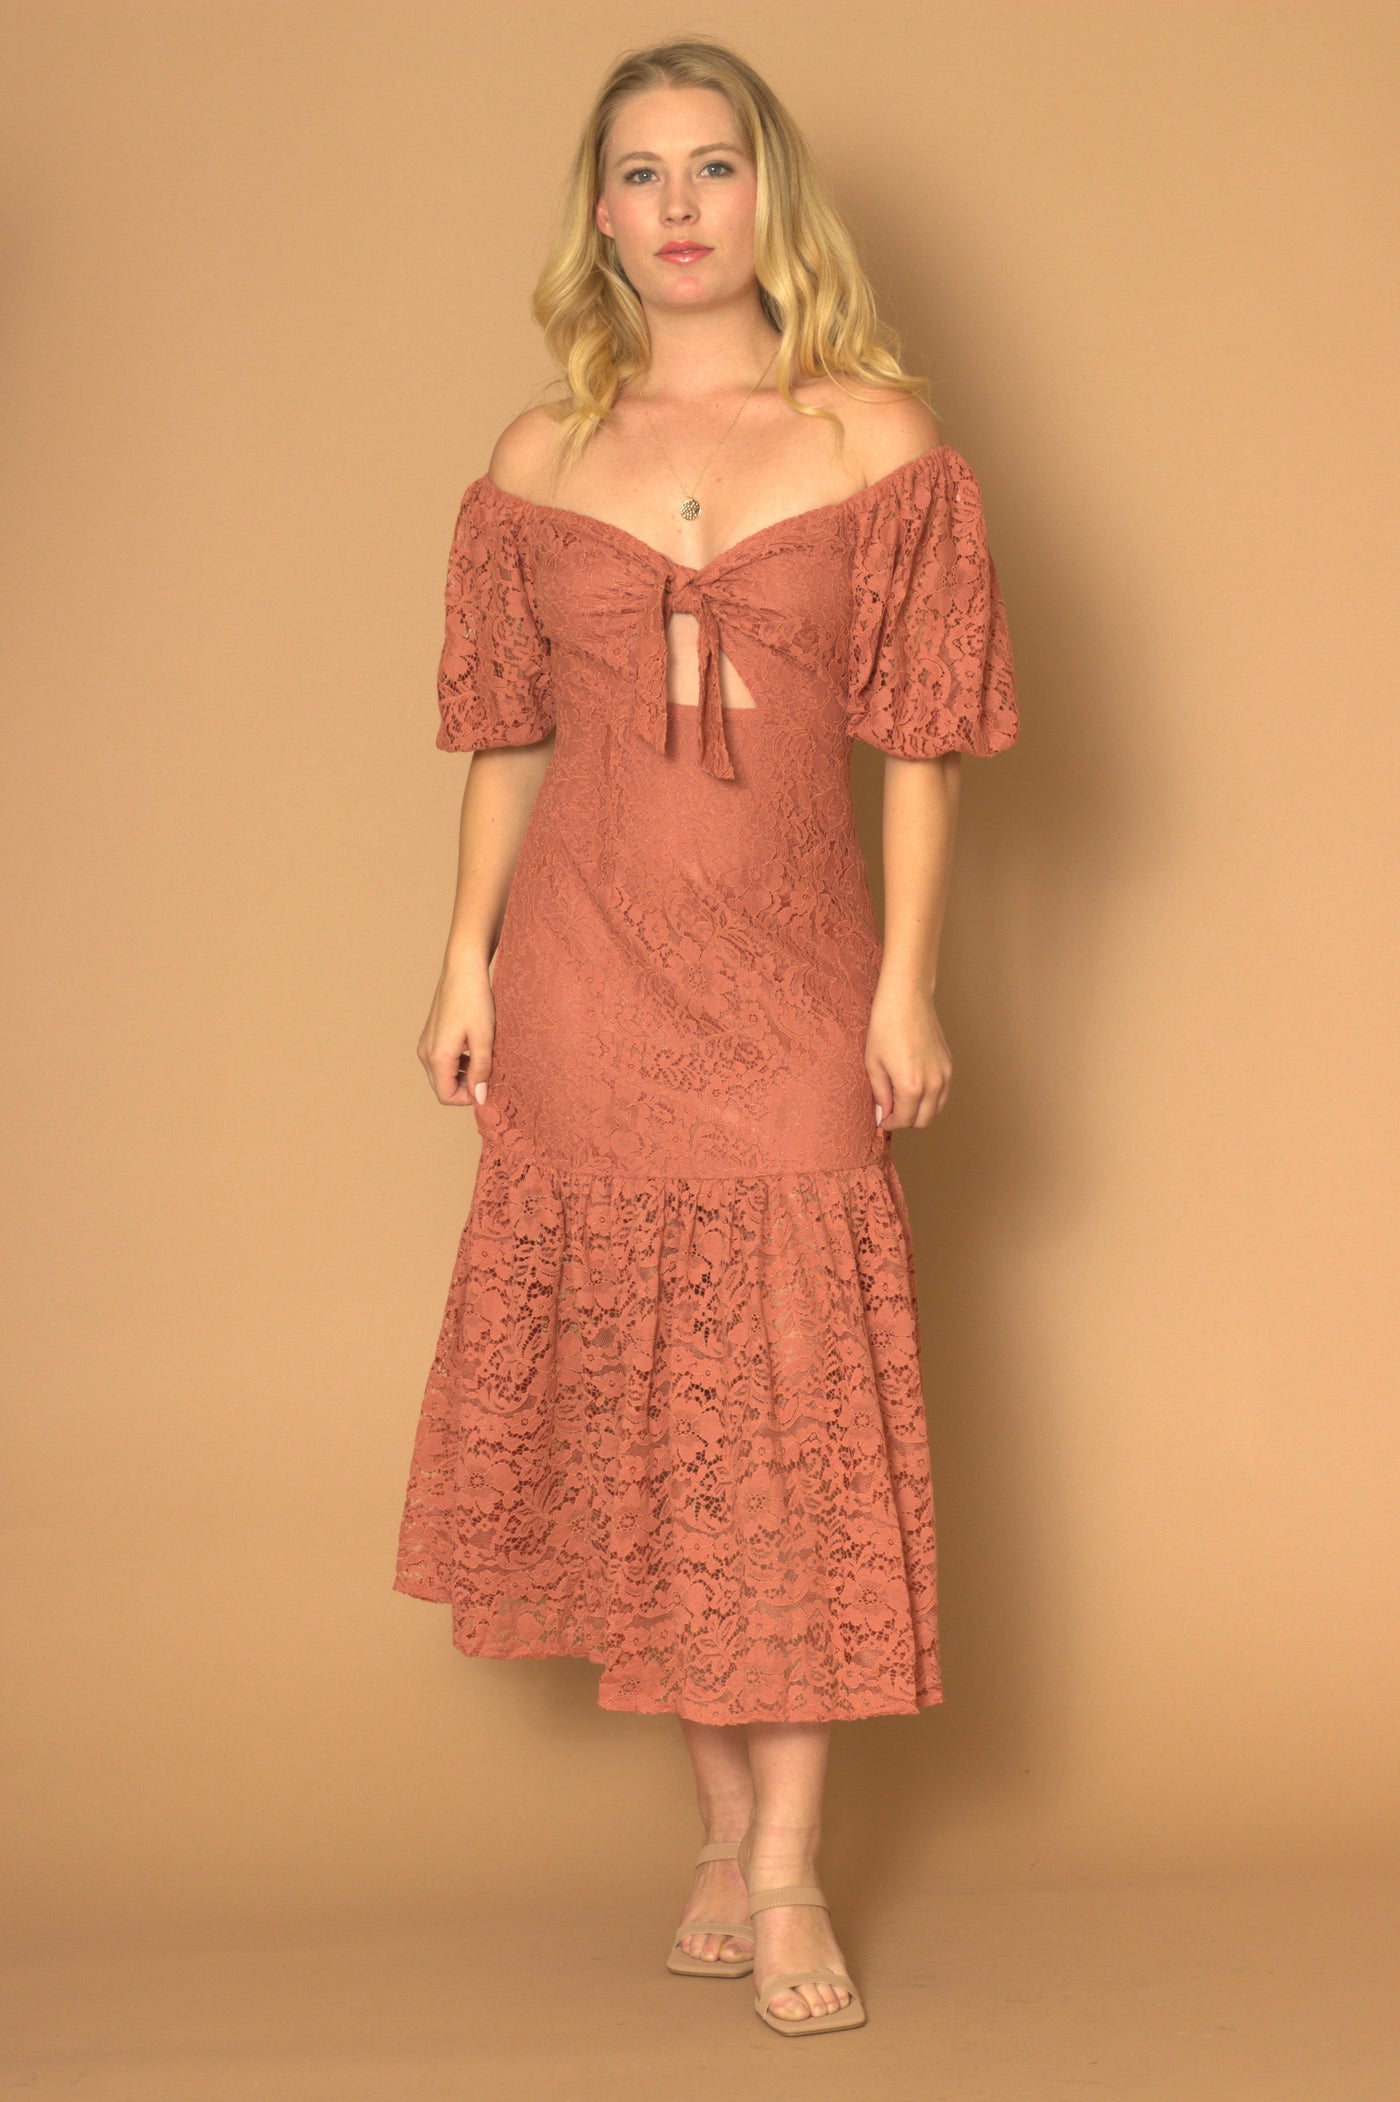 Kaitlin Coral Lace Dress